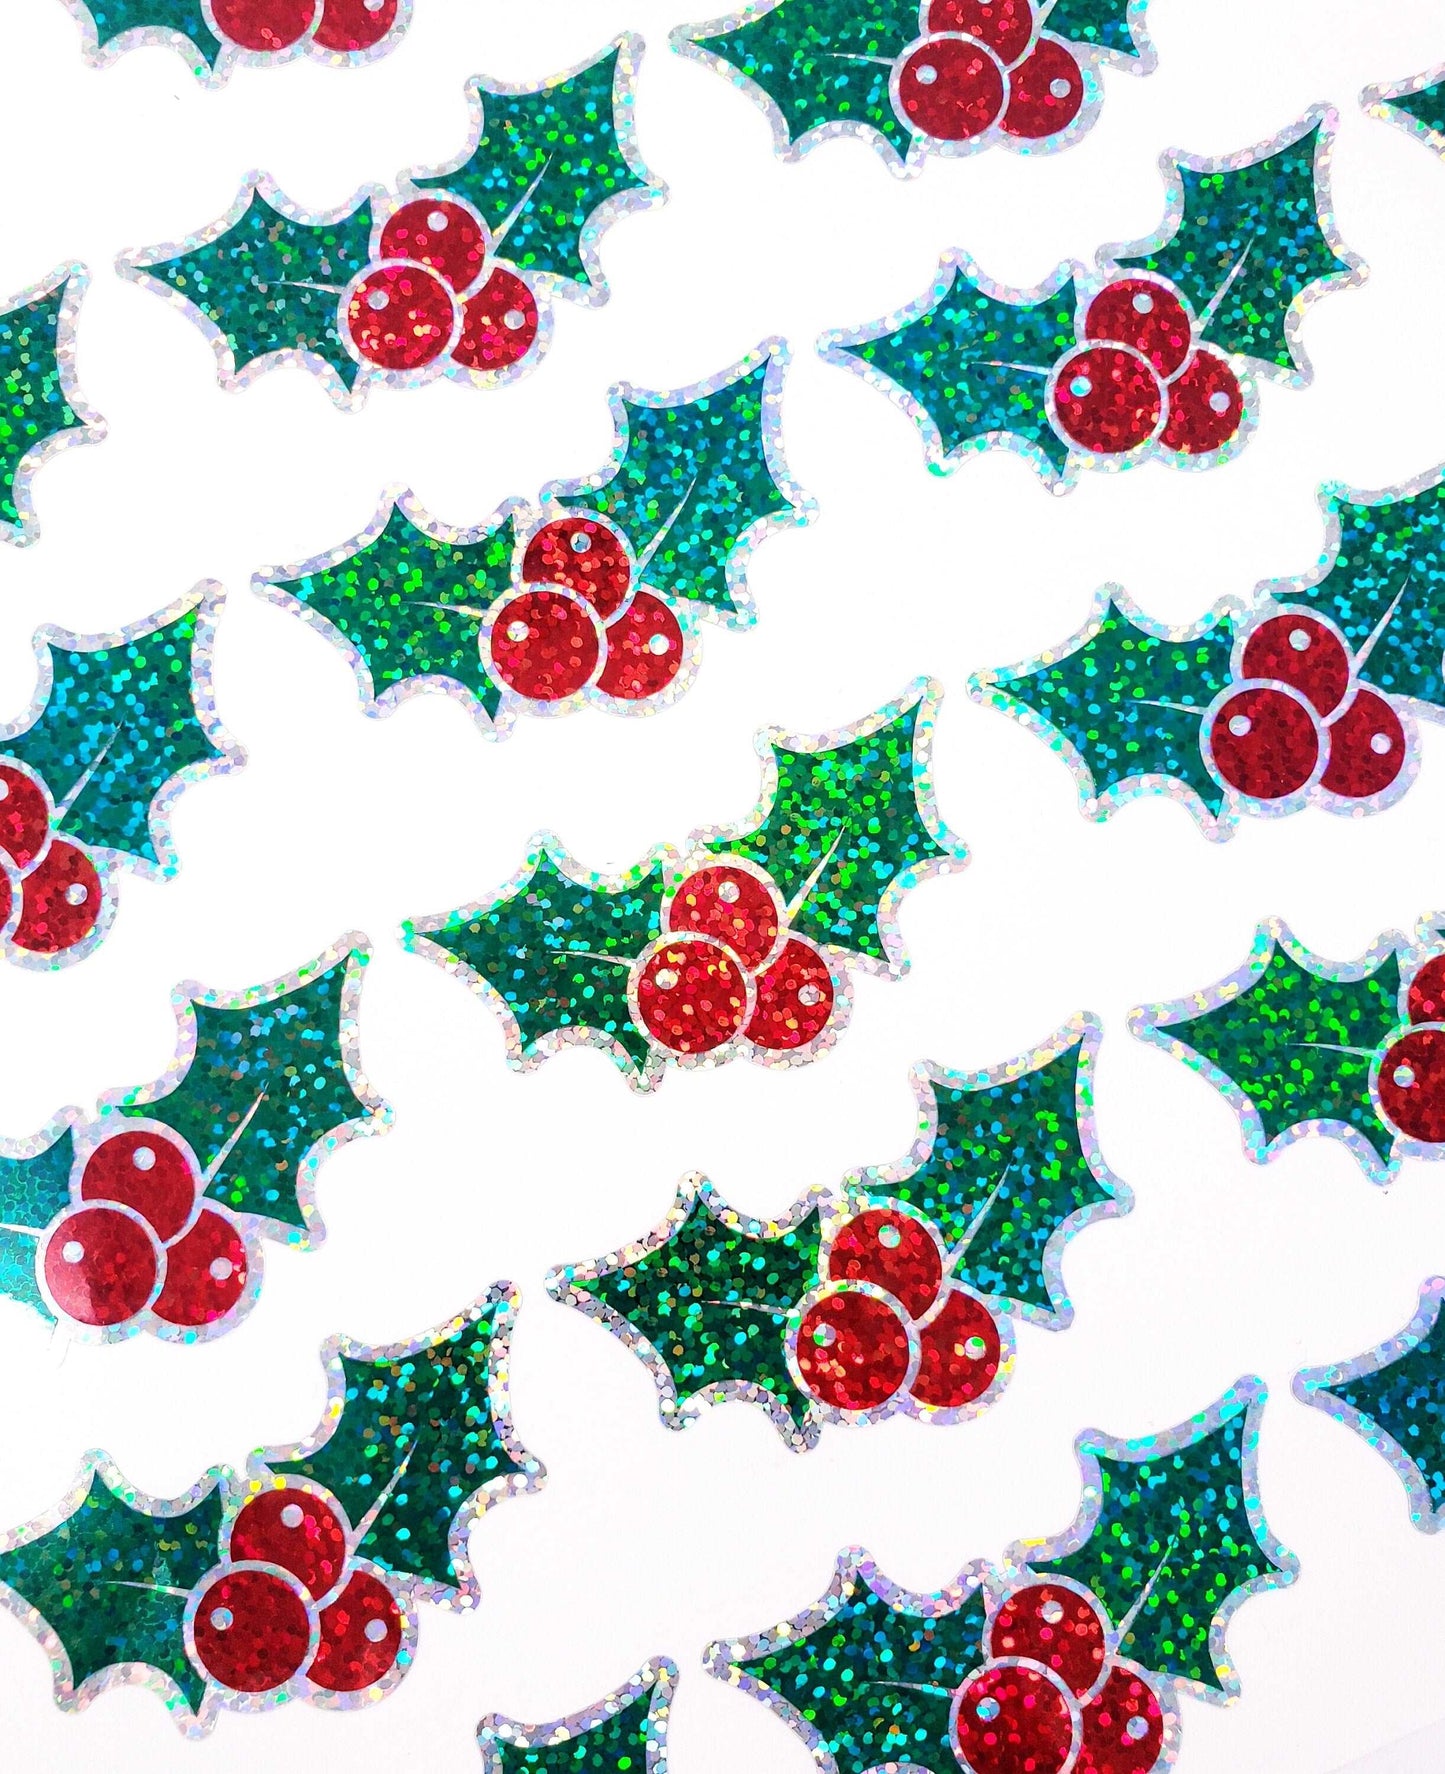 Holly Berry Stickers, Christmas Decals, set of 12 vinyl glitter stickers holiday party decor, disposable drink cup decals, tiered tray signs